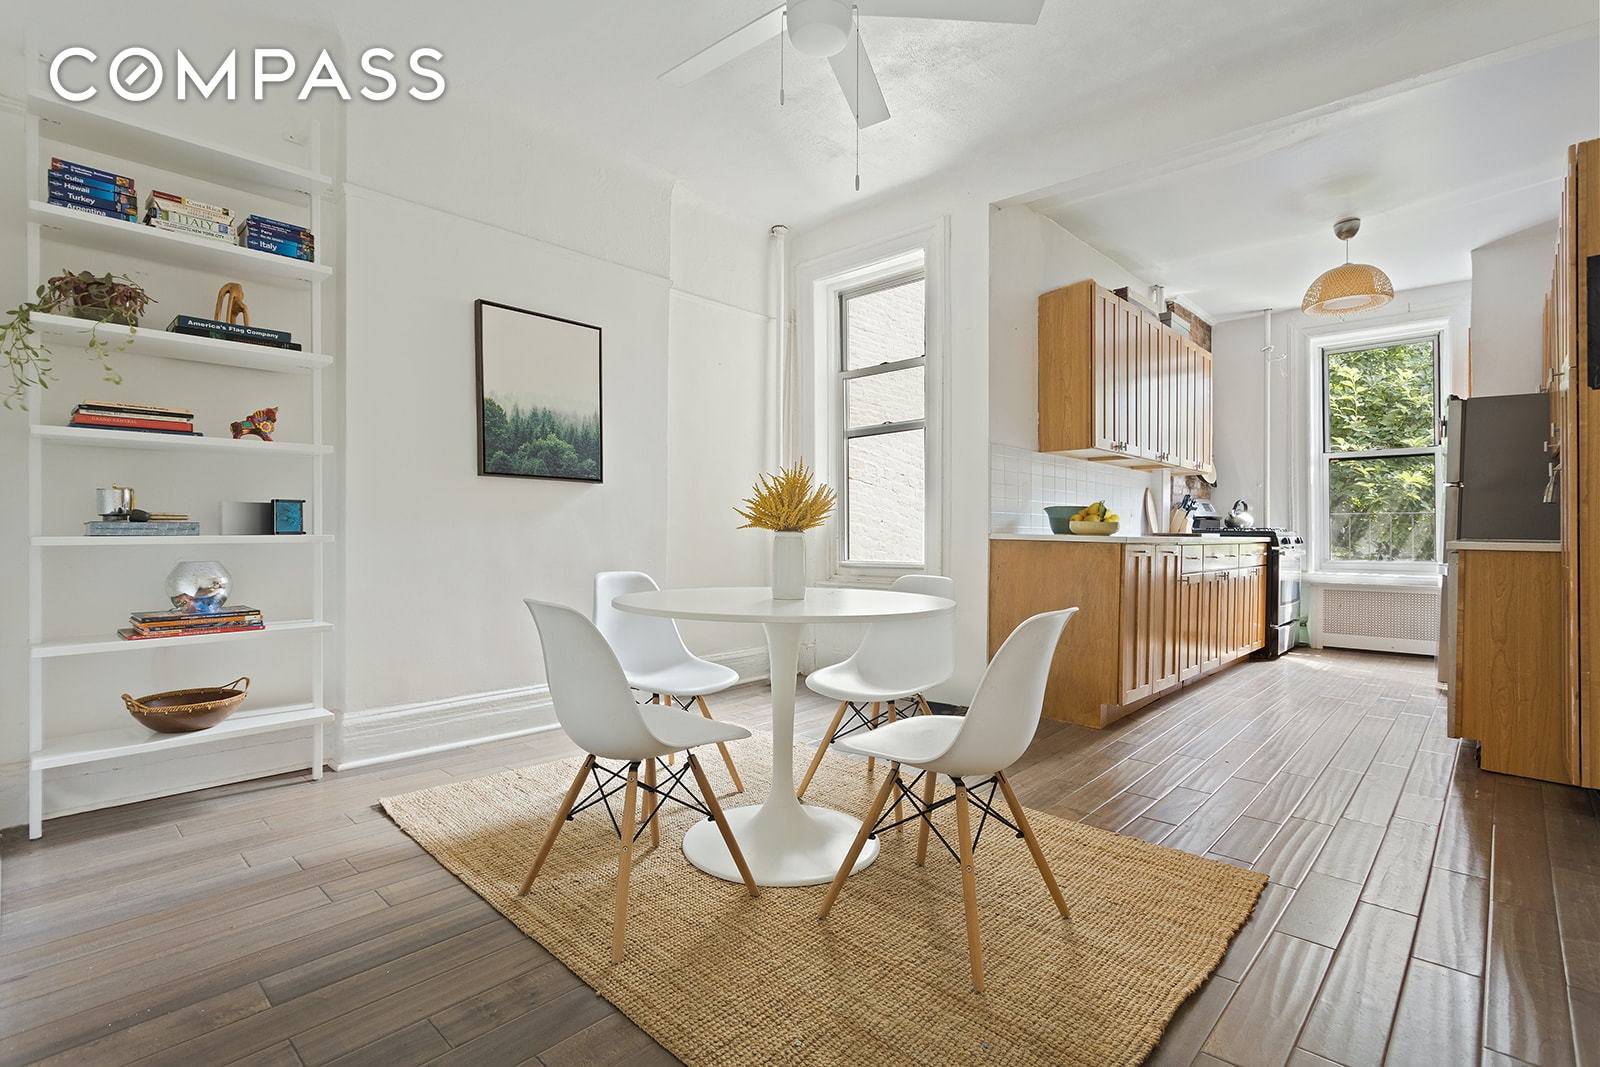 On peaceful Garfield Place in prime Park Slope, this 2BR 1.